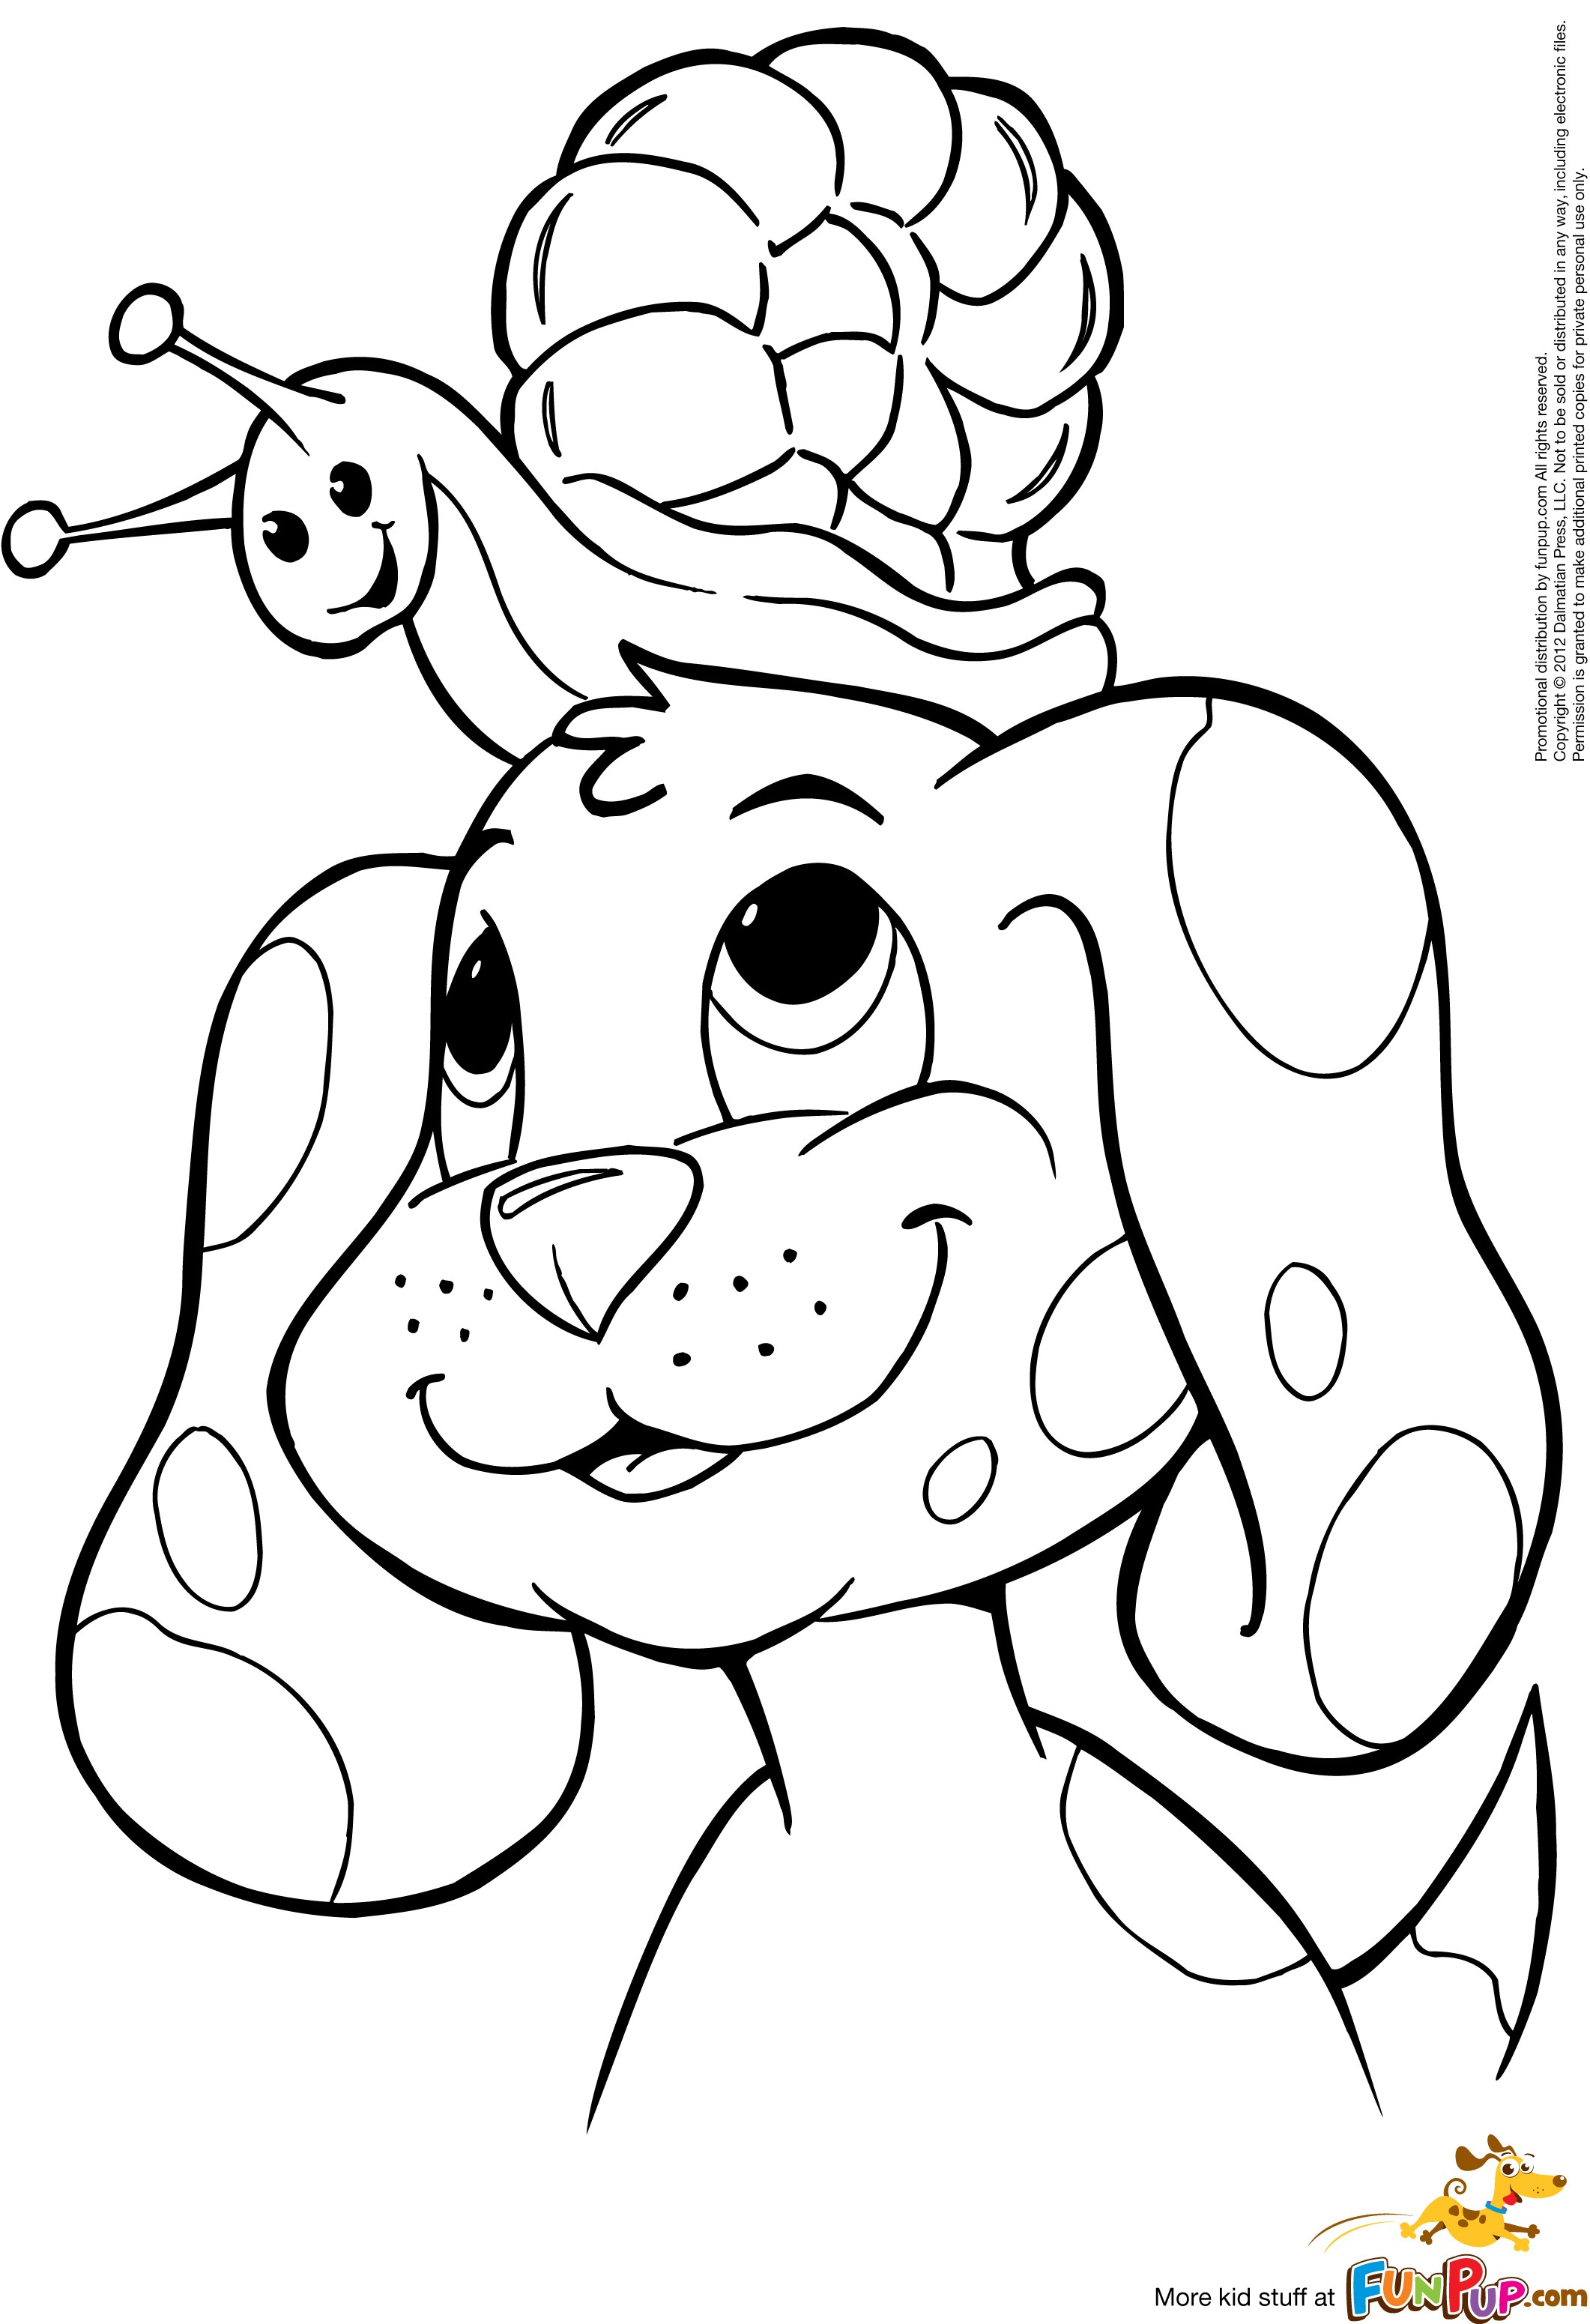 Easy Puppy Coloring Pages at Free printable